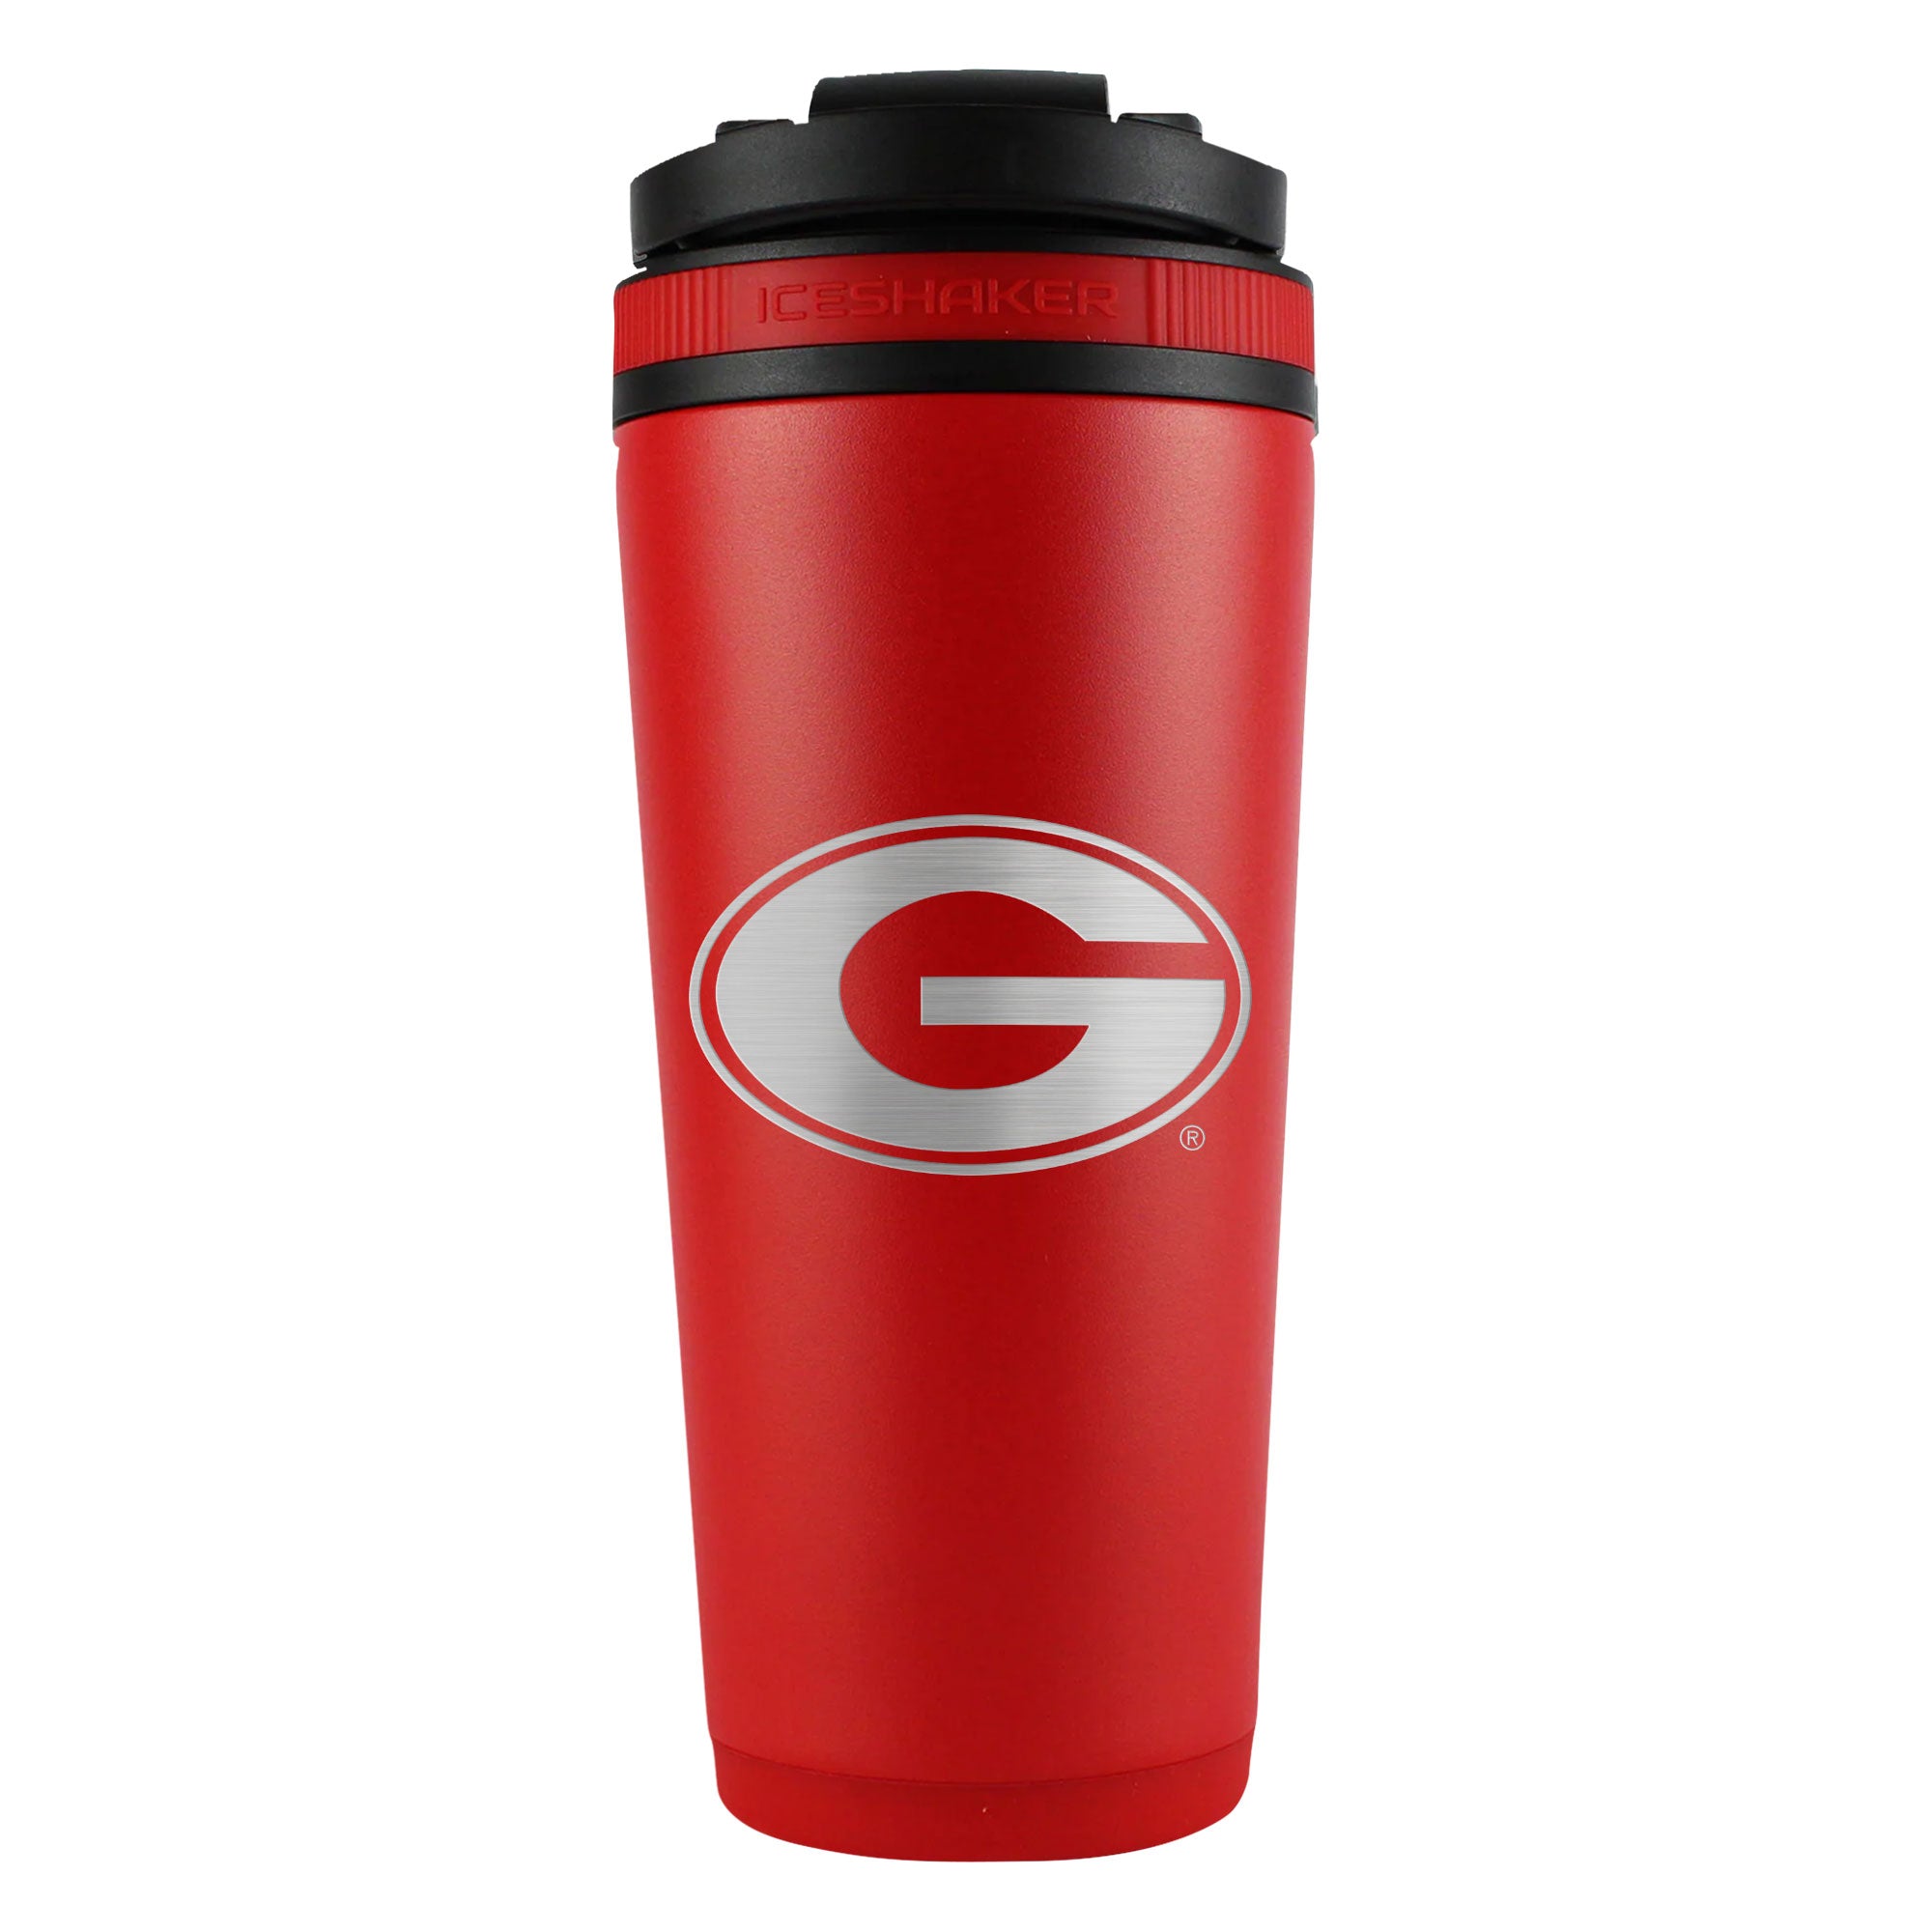 Officially Licensed University of Georgia 26oz Ice Shaker - Red